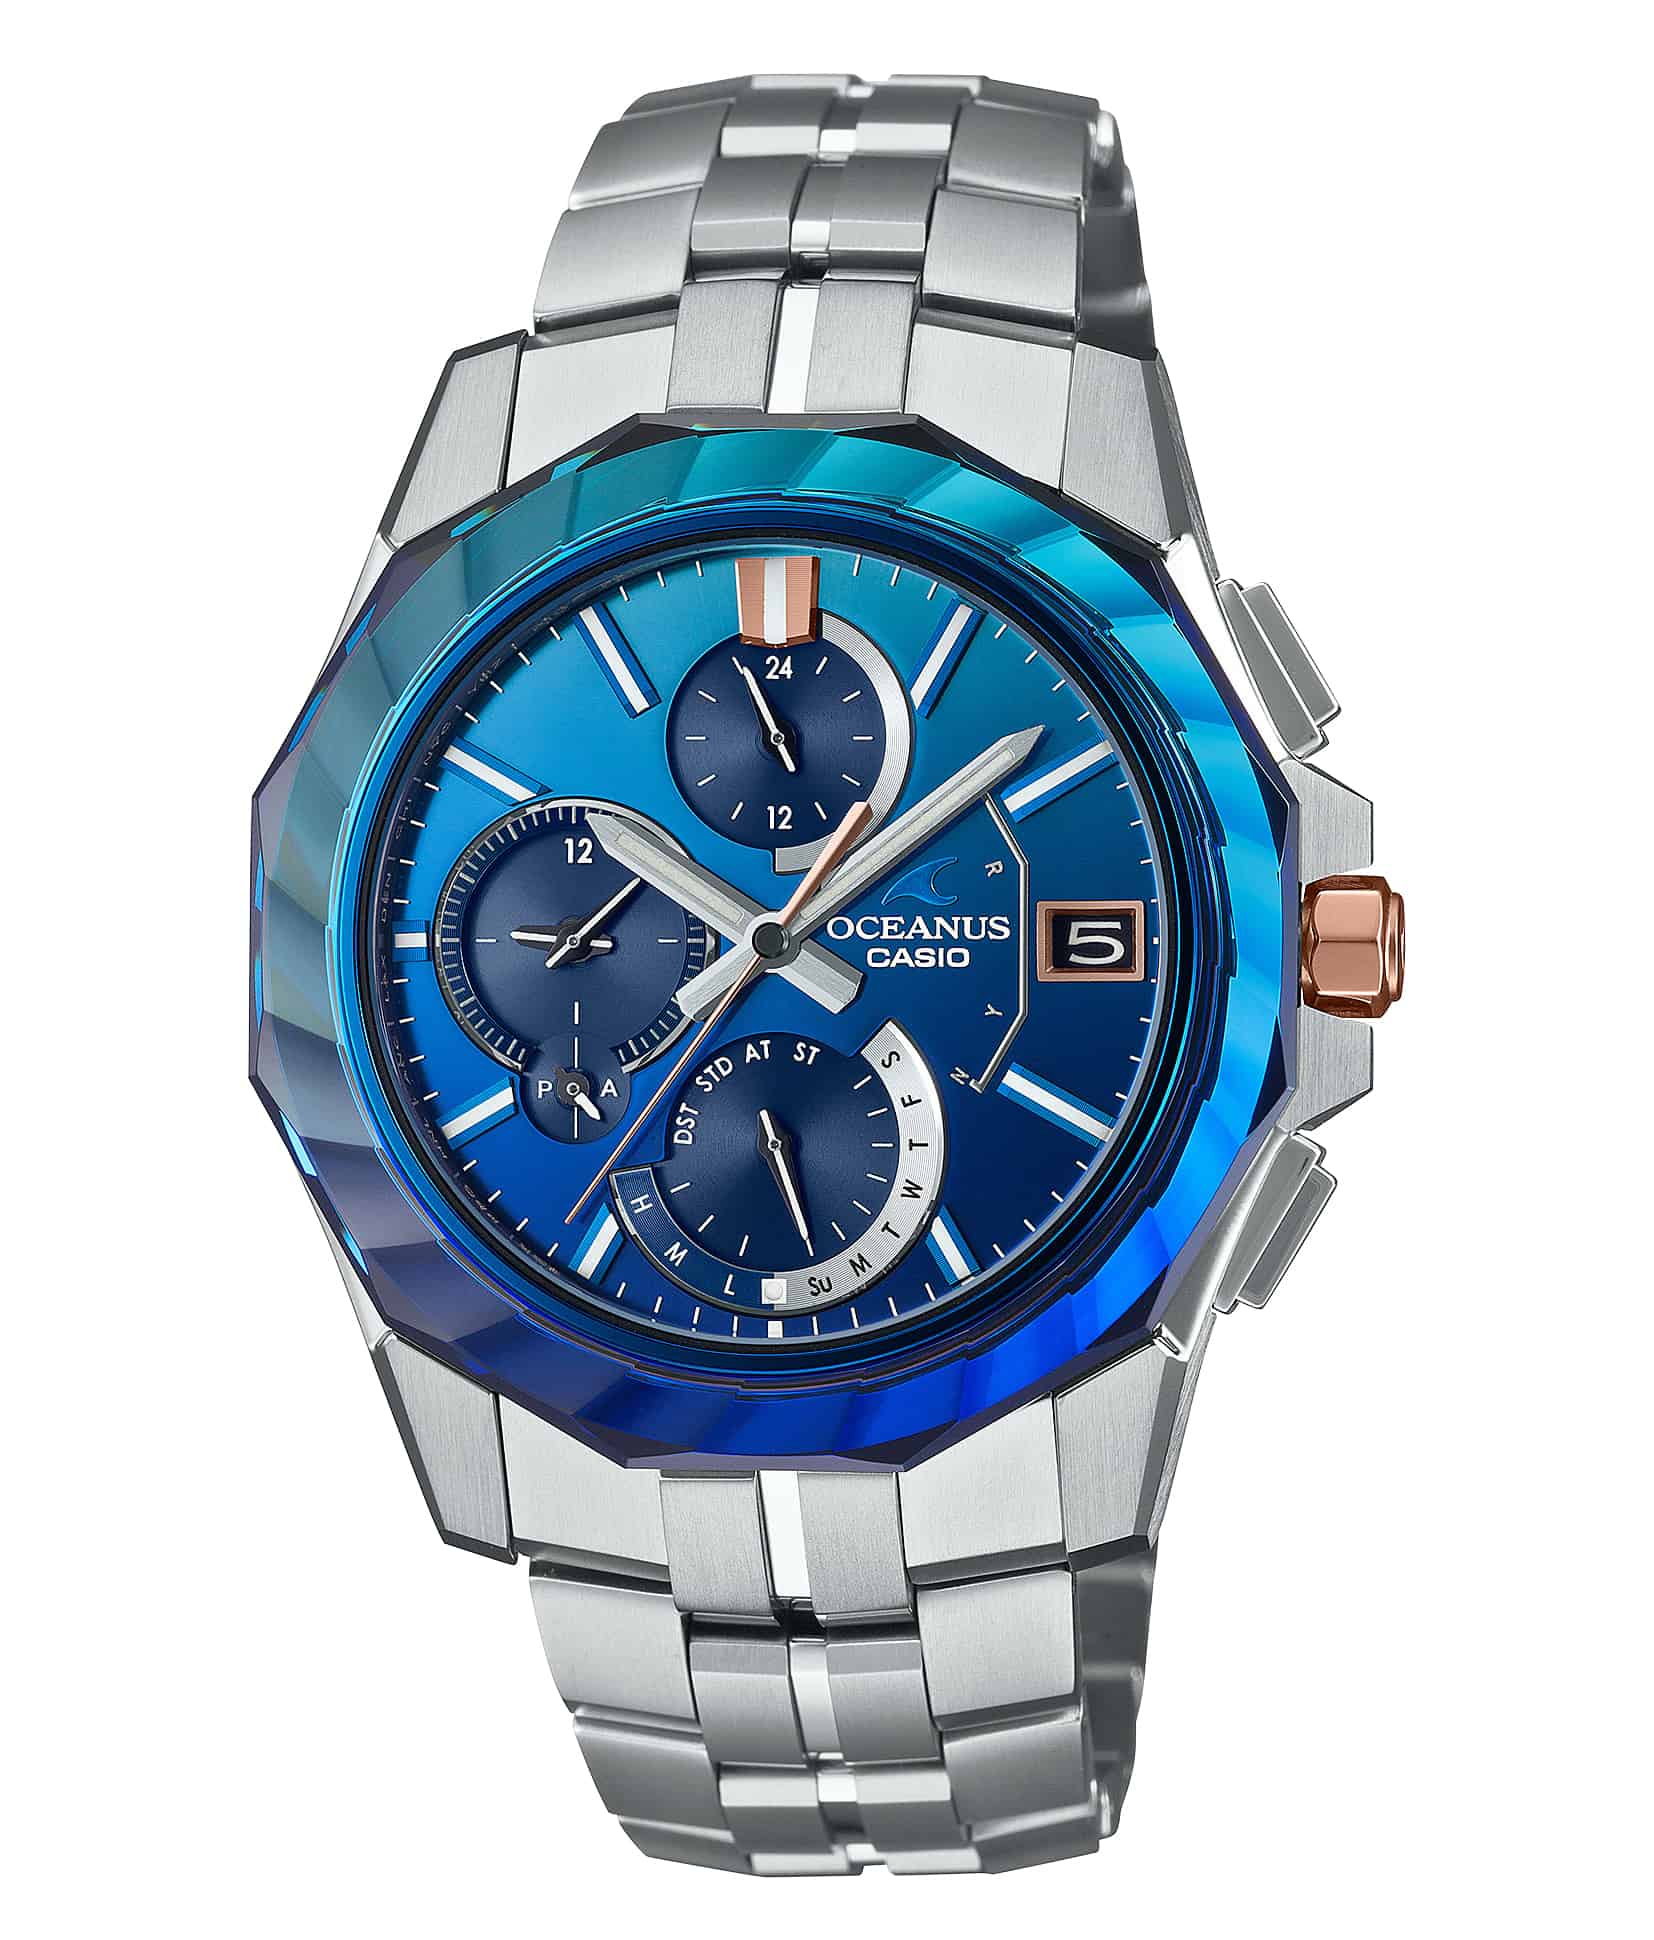 The New Casio Oceanus Pays Tribute to the Deep Blue Sea with Spiral-Cut Sapphire Bezel Anchored by Hardened Titanium Case and Bracelet